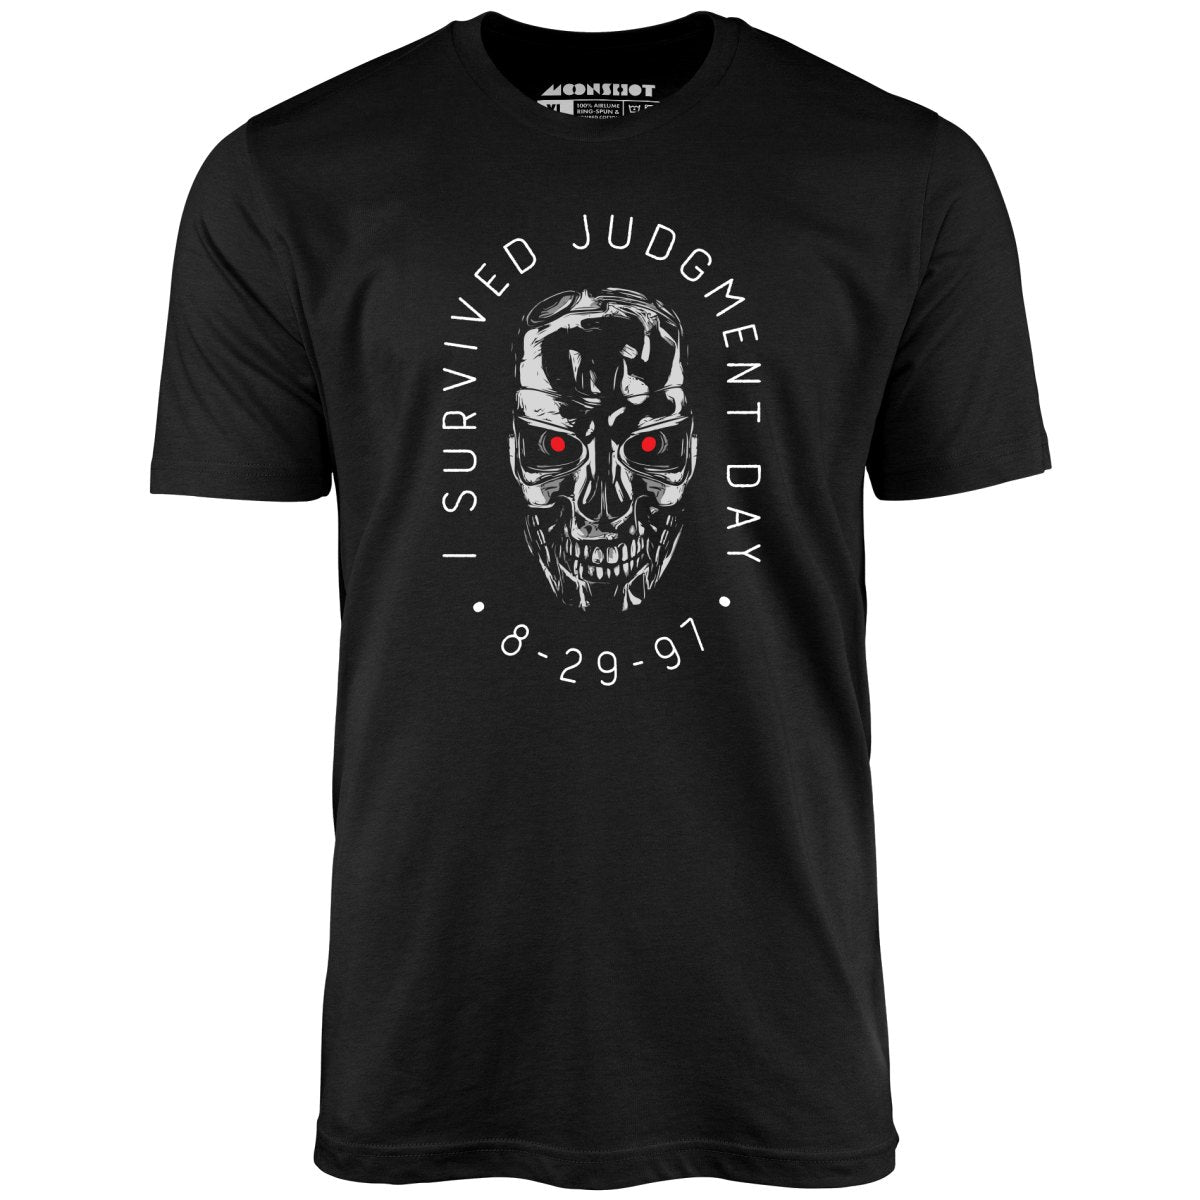 I Survived Judgment Day - Unisex T-Shirt